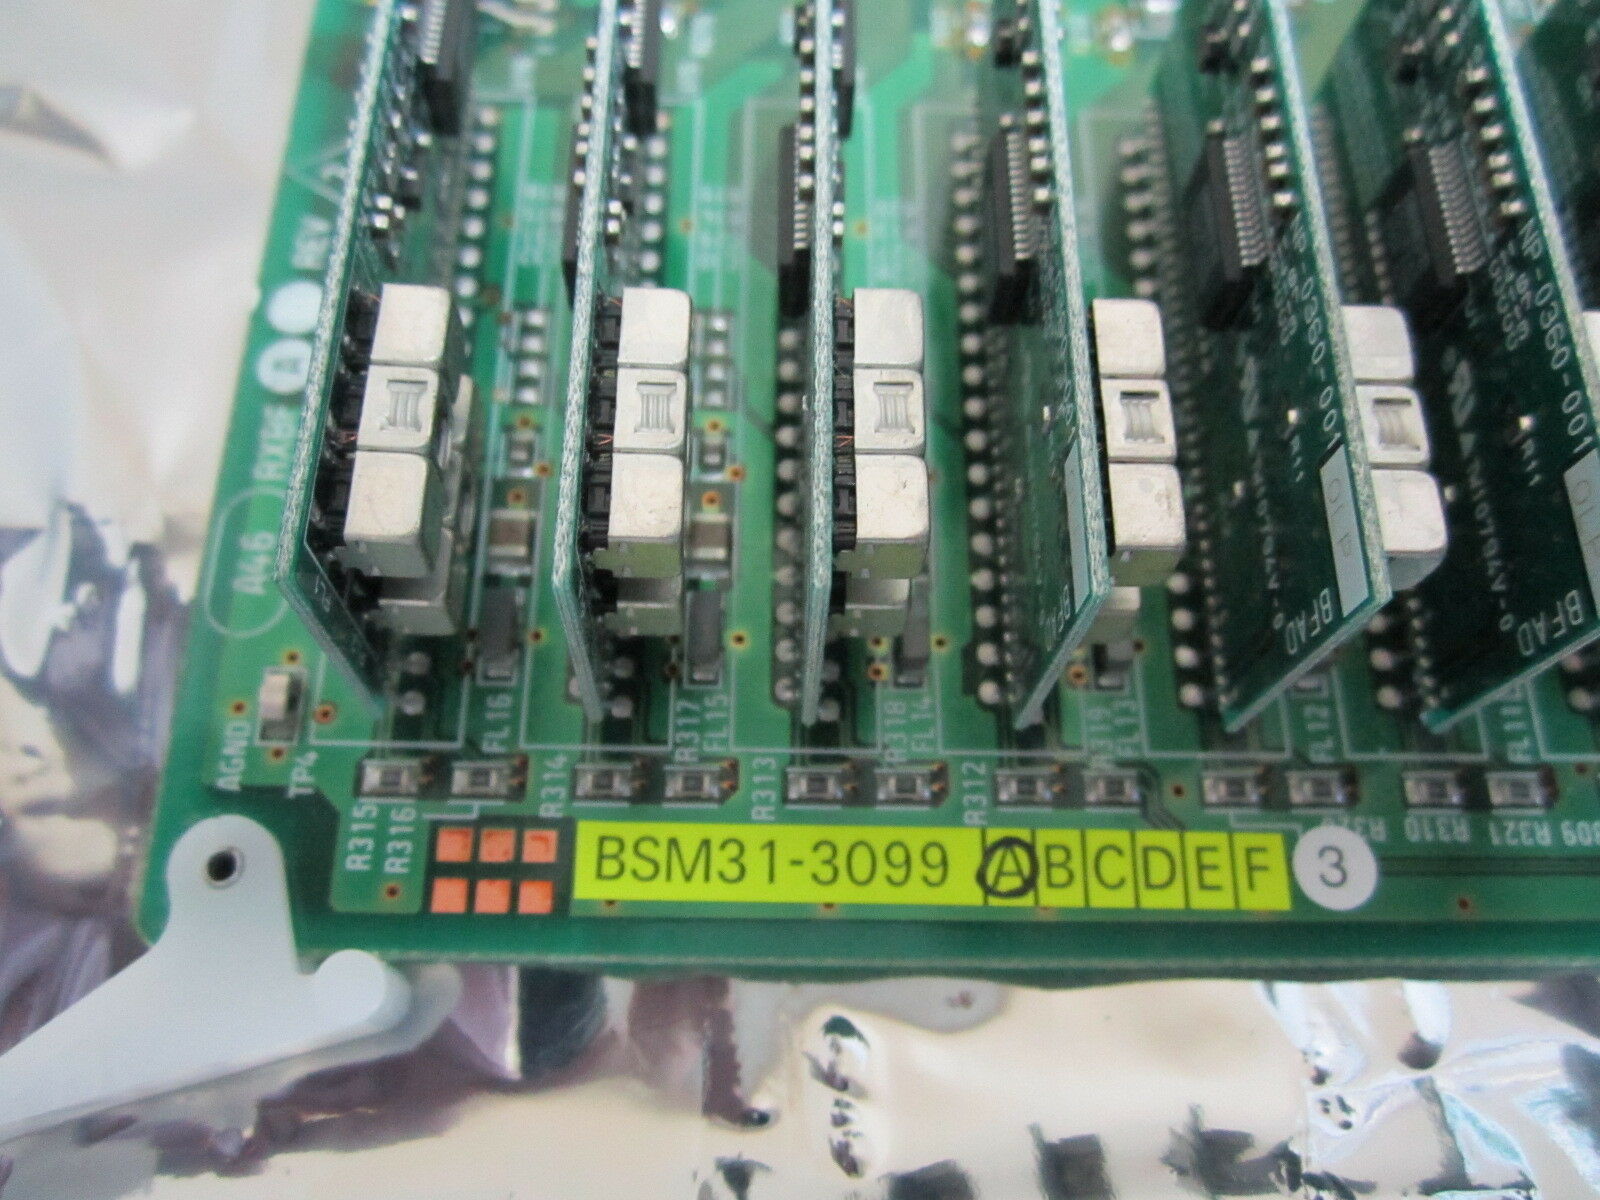 Toshiba Medical Systems BSM31-3099 A3 PCB Beam Former Board Ultrasound Imaging DIAGNOSTIC ULTRASOUND MACHINES FOR SALE